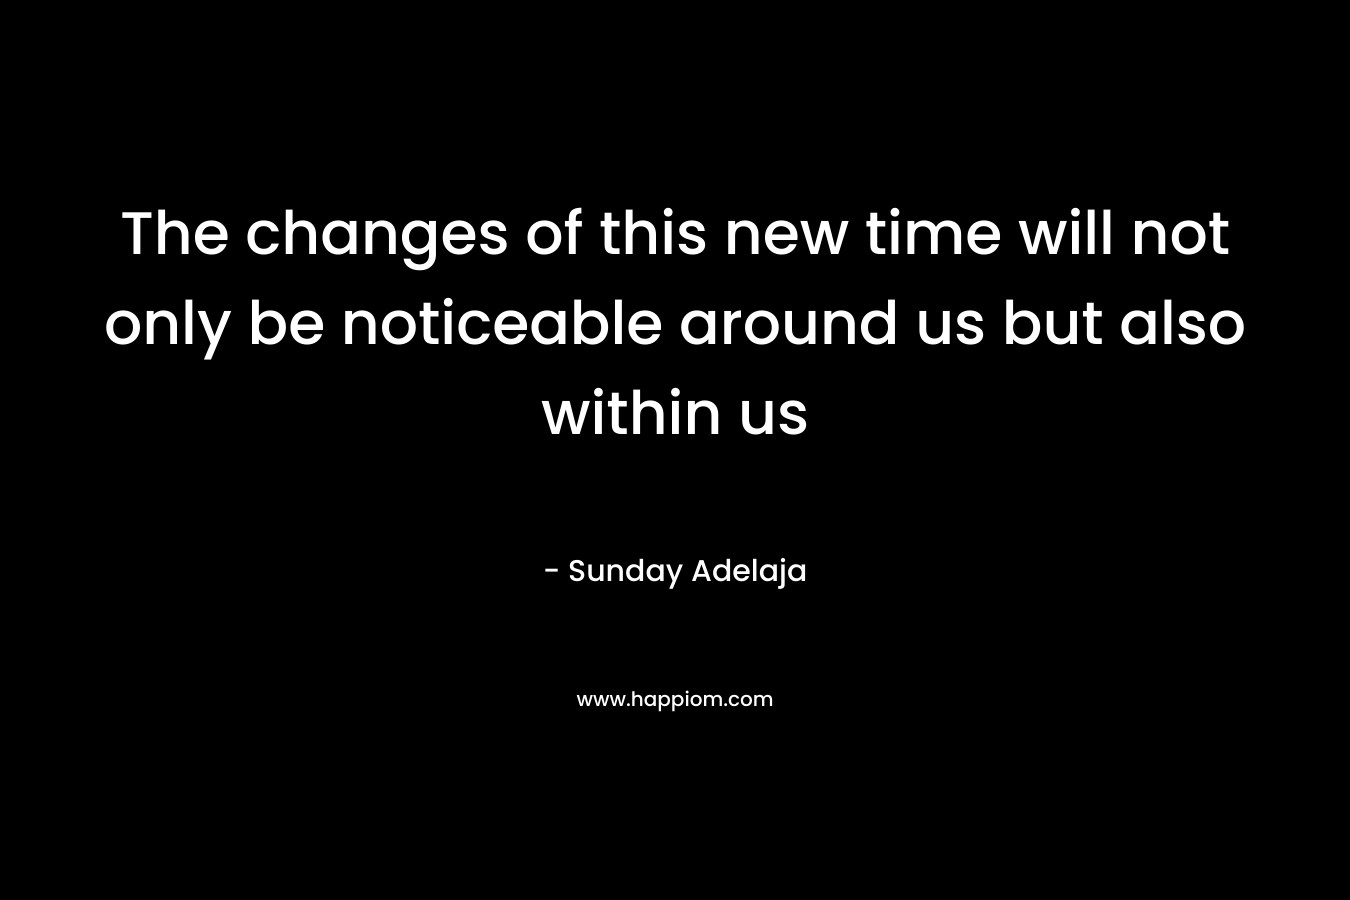 The changes of this new time will not only be noticeable around us but also within us